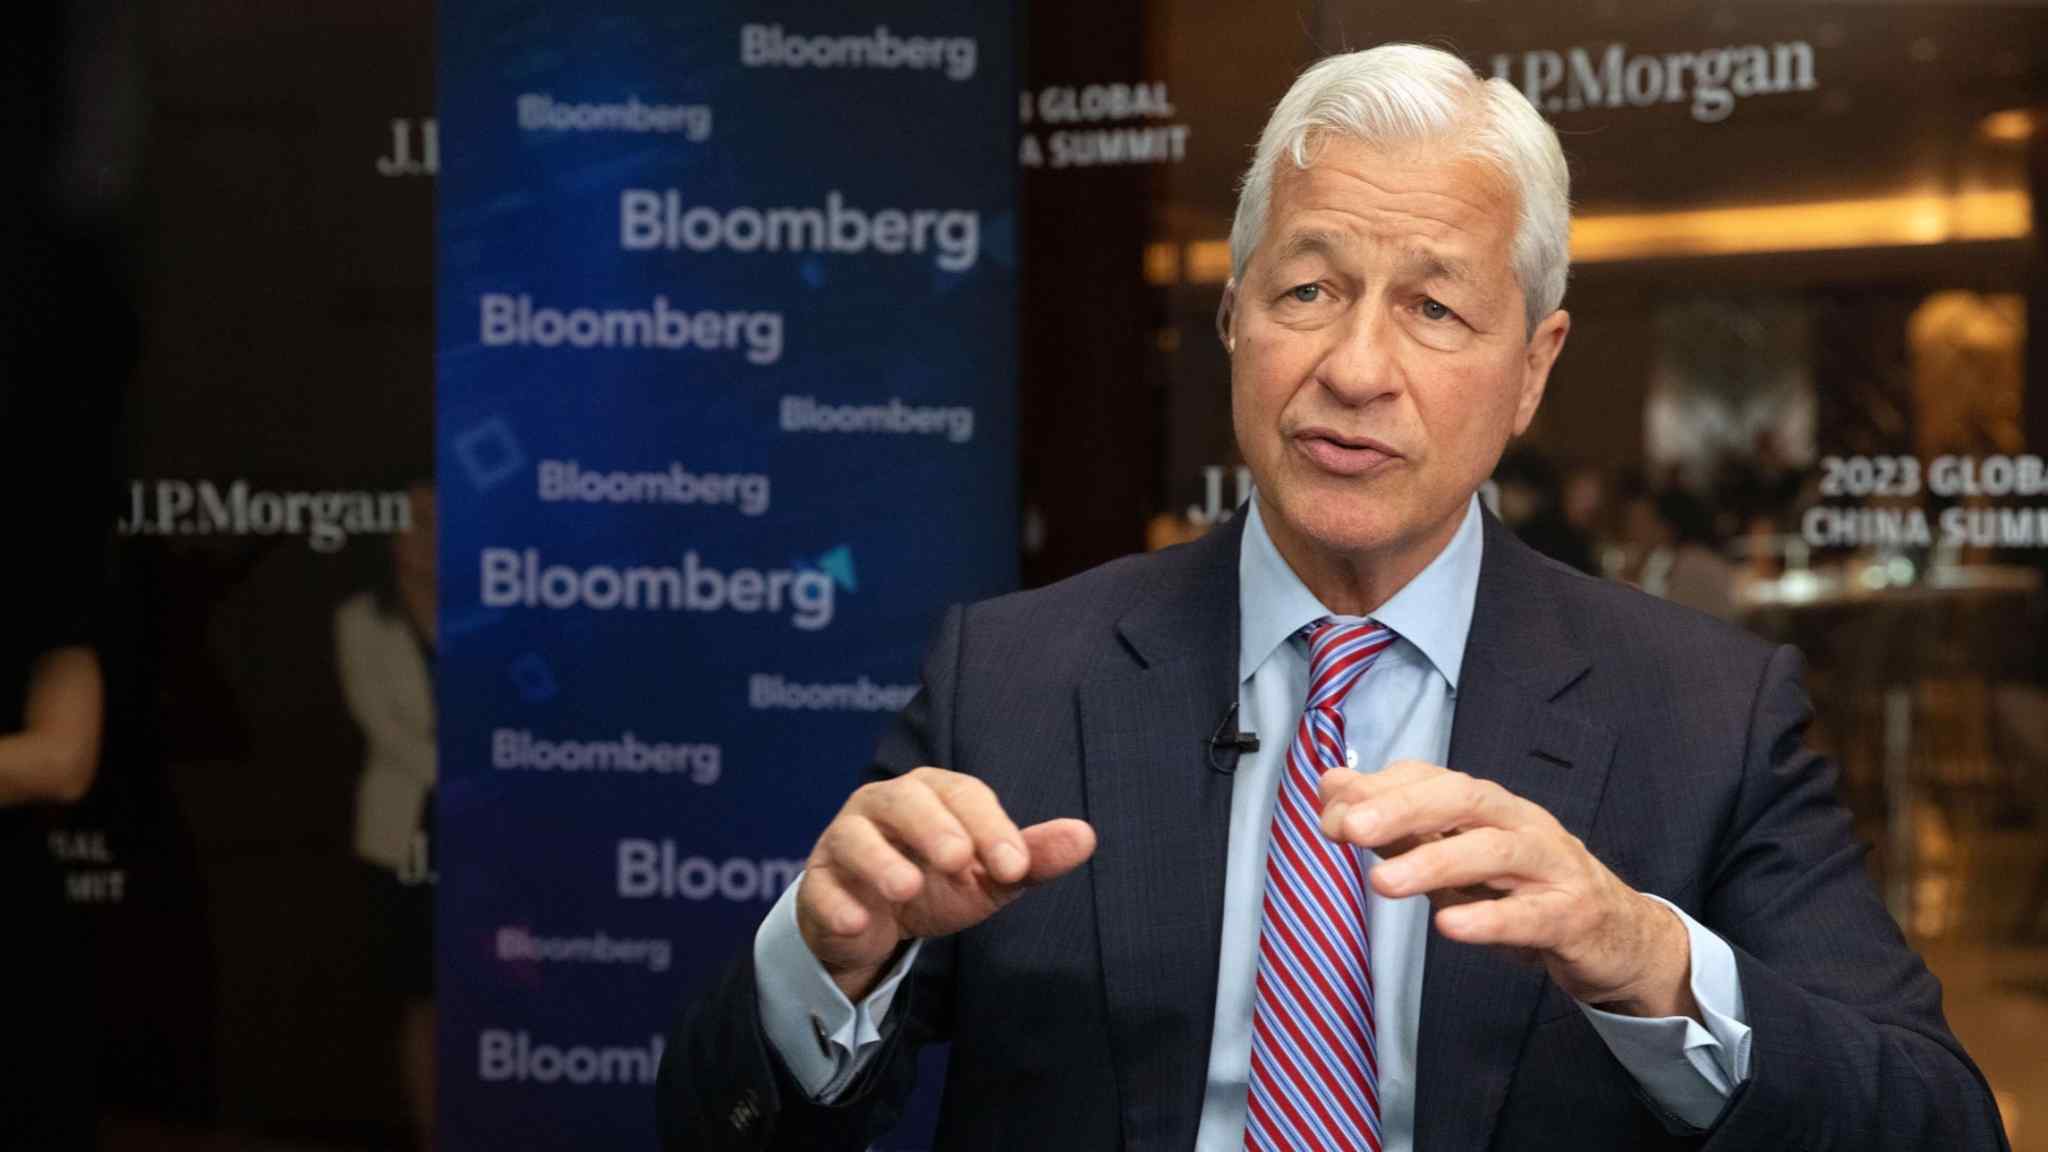 Dimon’s Shanghai show points to broader chill in China